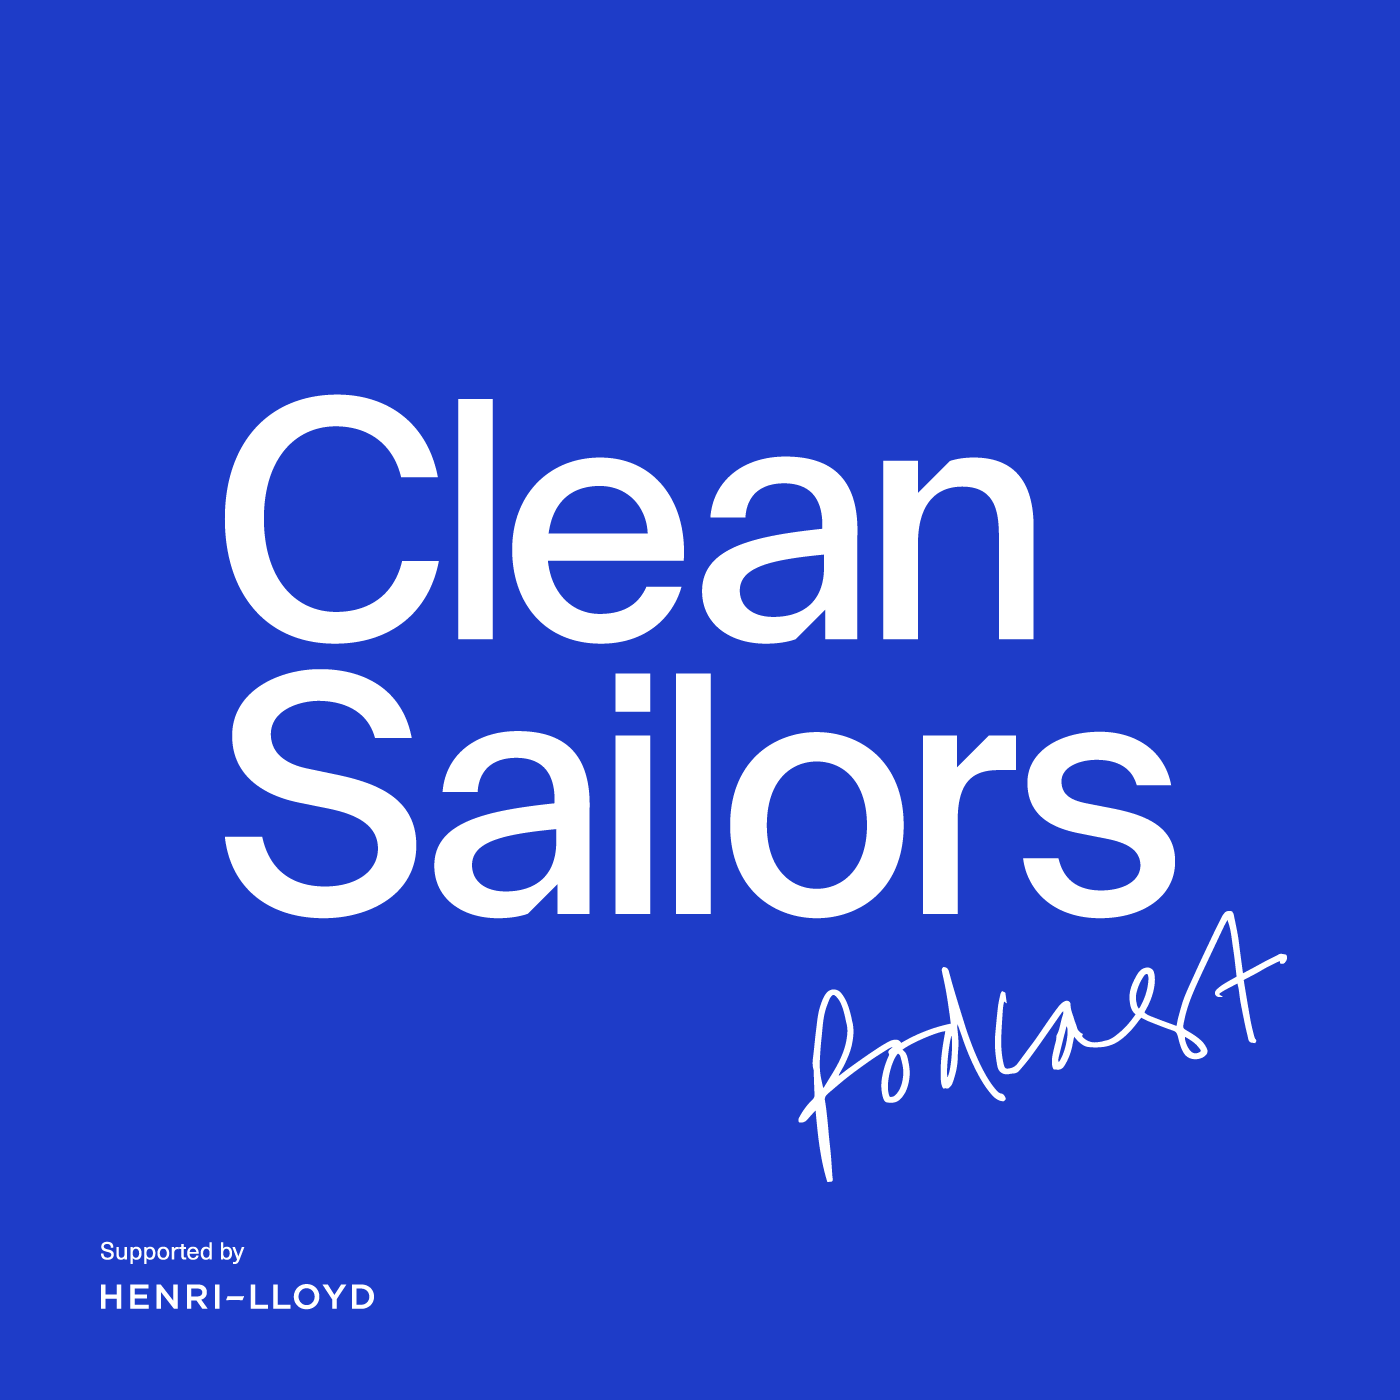 Welcome to our Clean Sailors podcast!